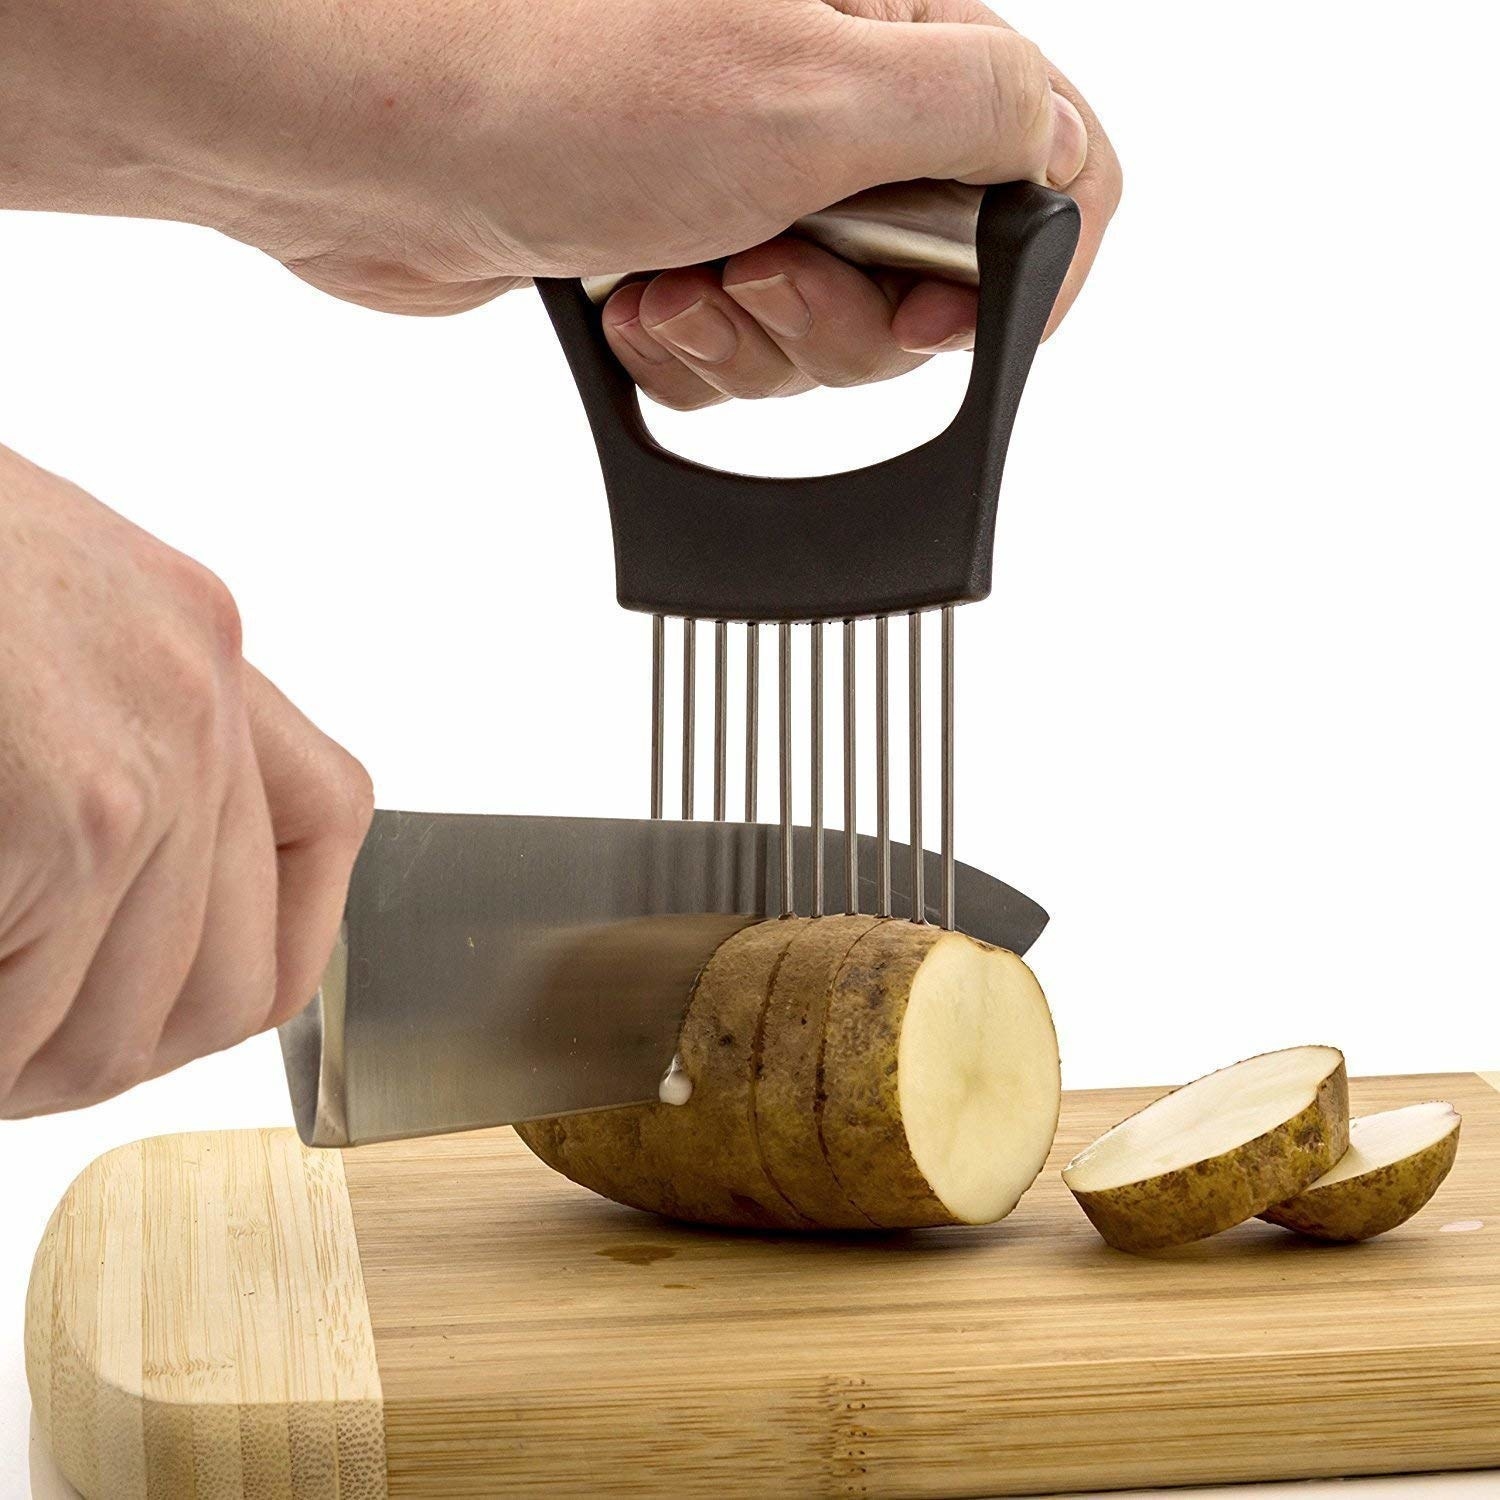 A person using the gadget to hold a potato while its being cut